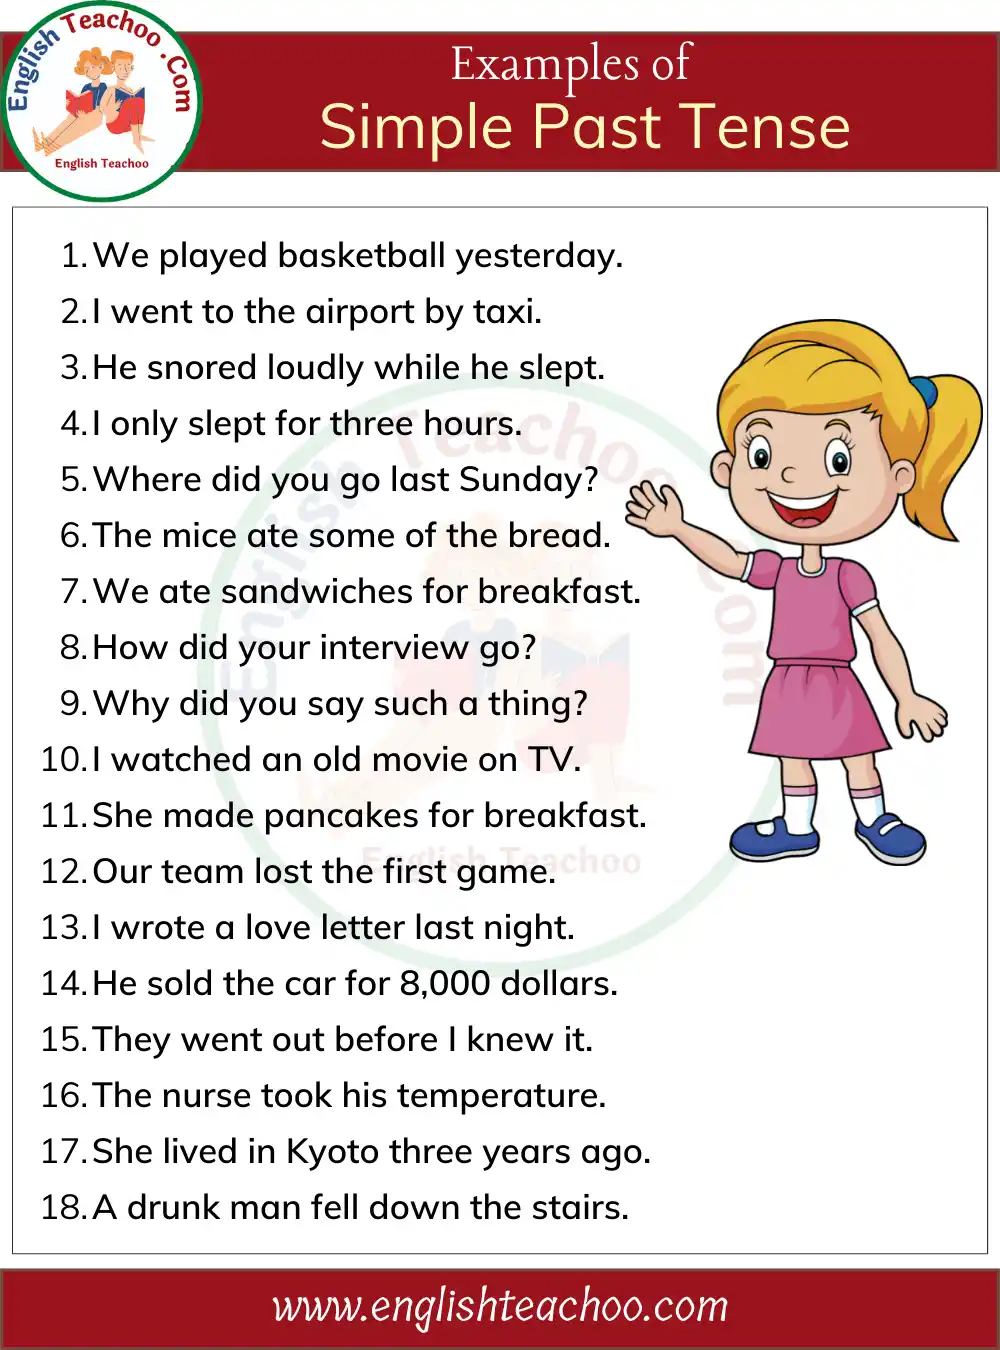 18 Examples of Simple Past Tense In Sentences - Simple Past Tense Sentence Examples